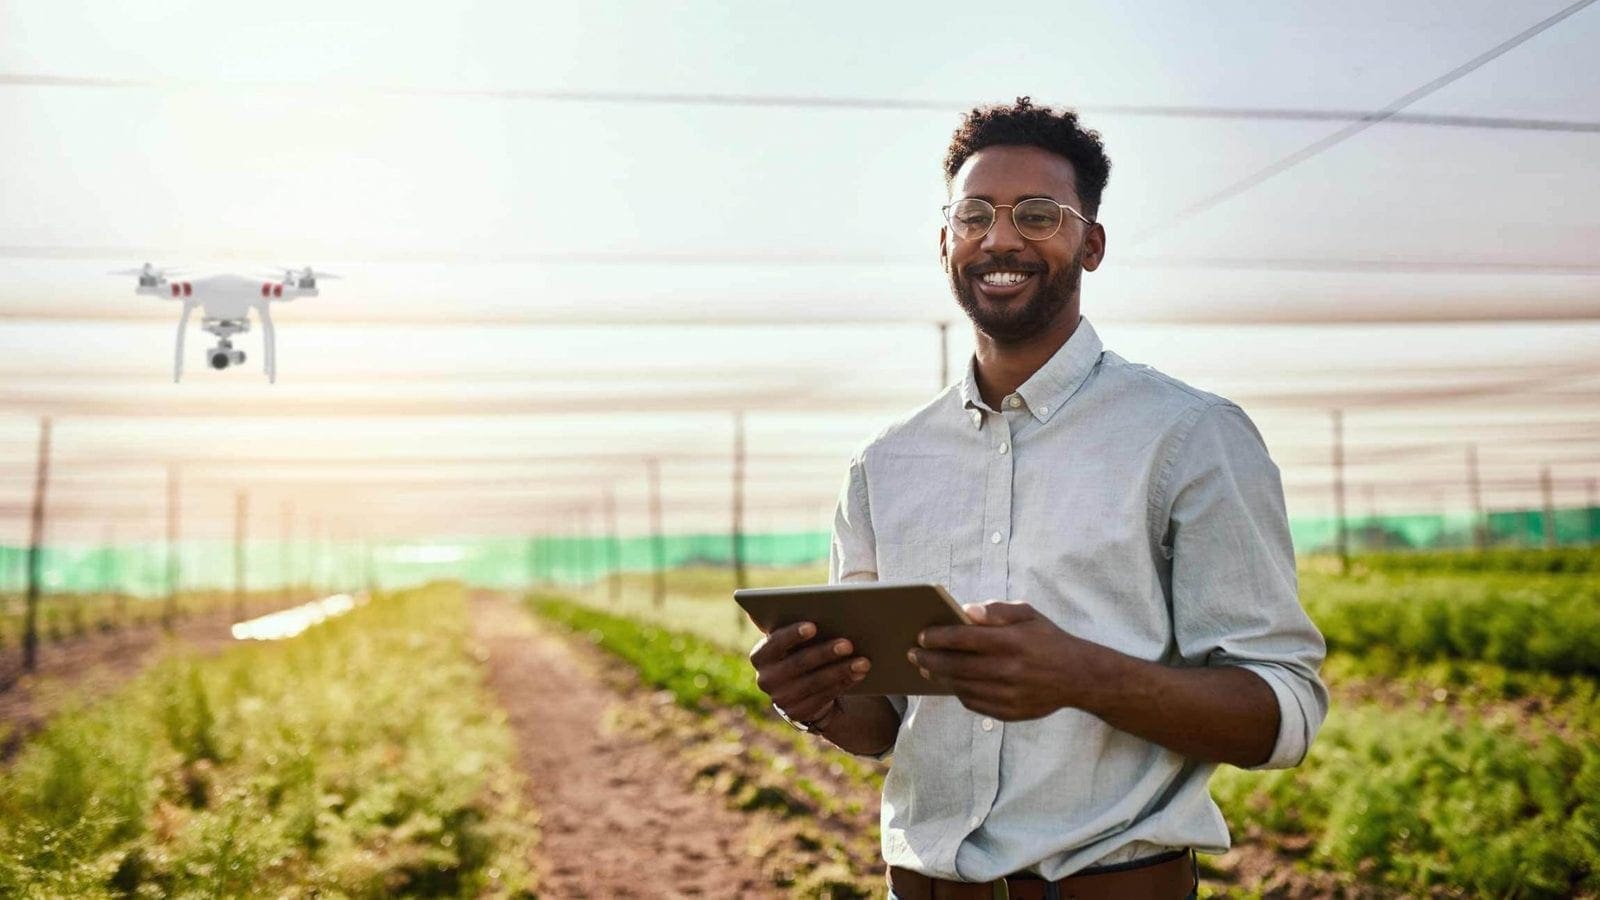 UK based IT firm Zetogon invests in Nigerian agritech company AirSmat